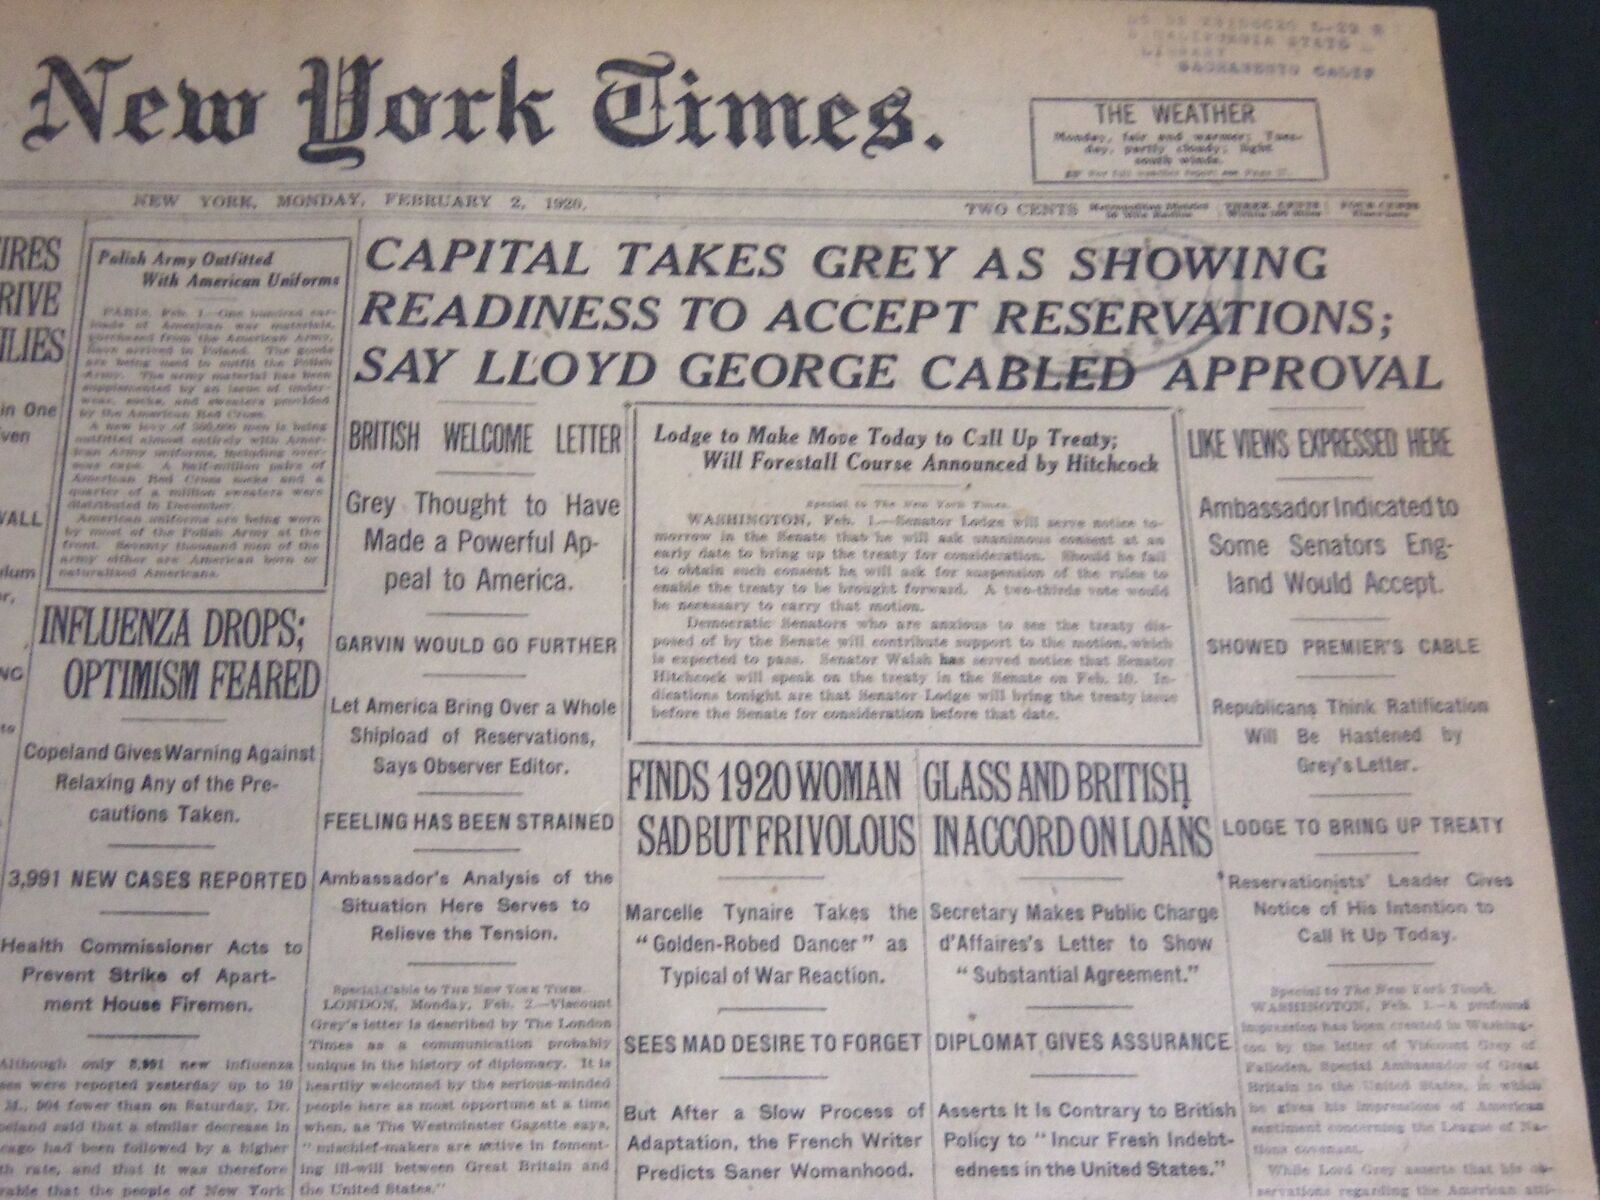 1920 FEB 2 NEW YORK TIMES - CAPITAL TAKES GREY TO ACCEPT RESERVATIONS - NT 6786